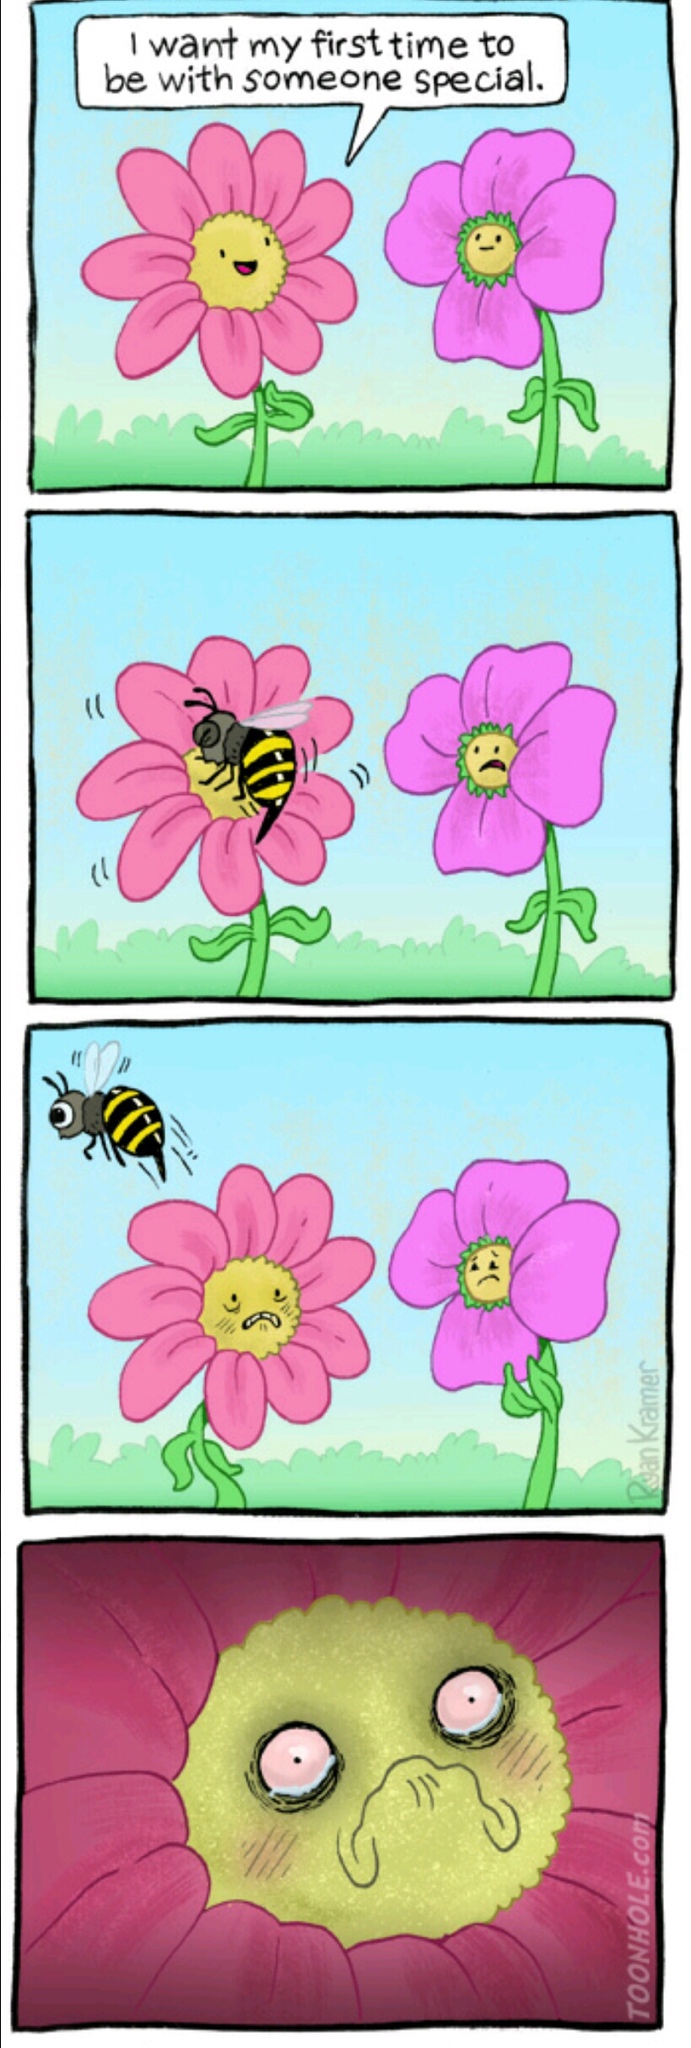 funny bee comics - I want my first time to be with someone special. Ran Kramer Toonhole.com